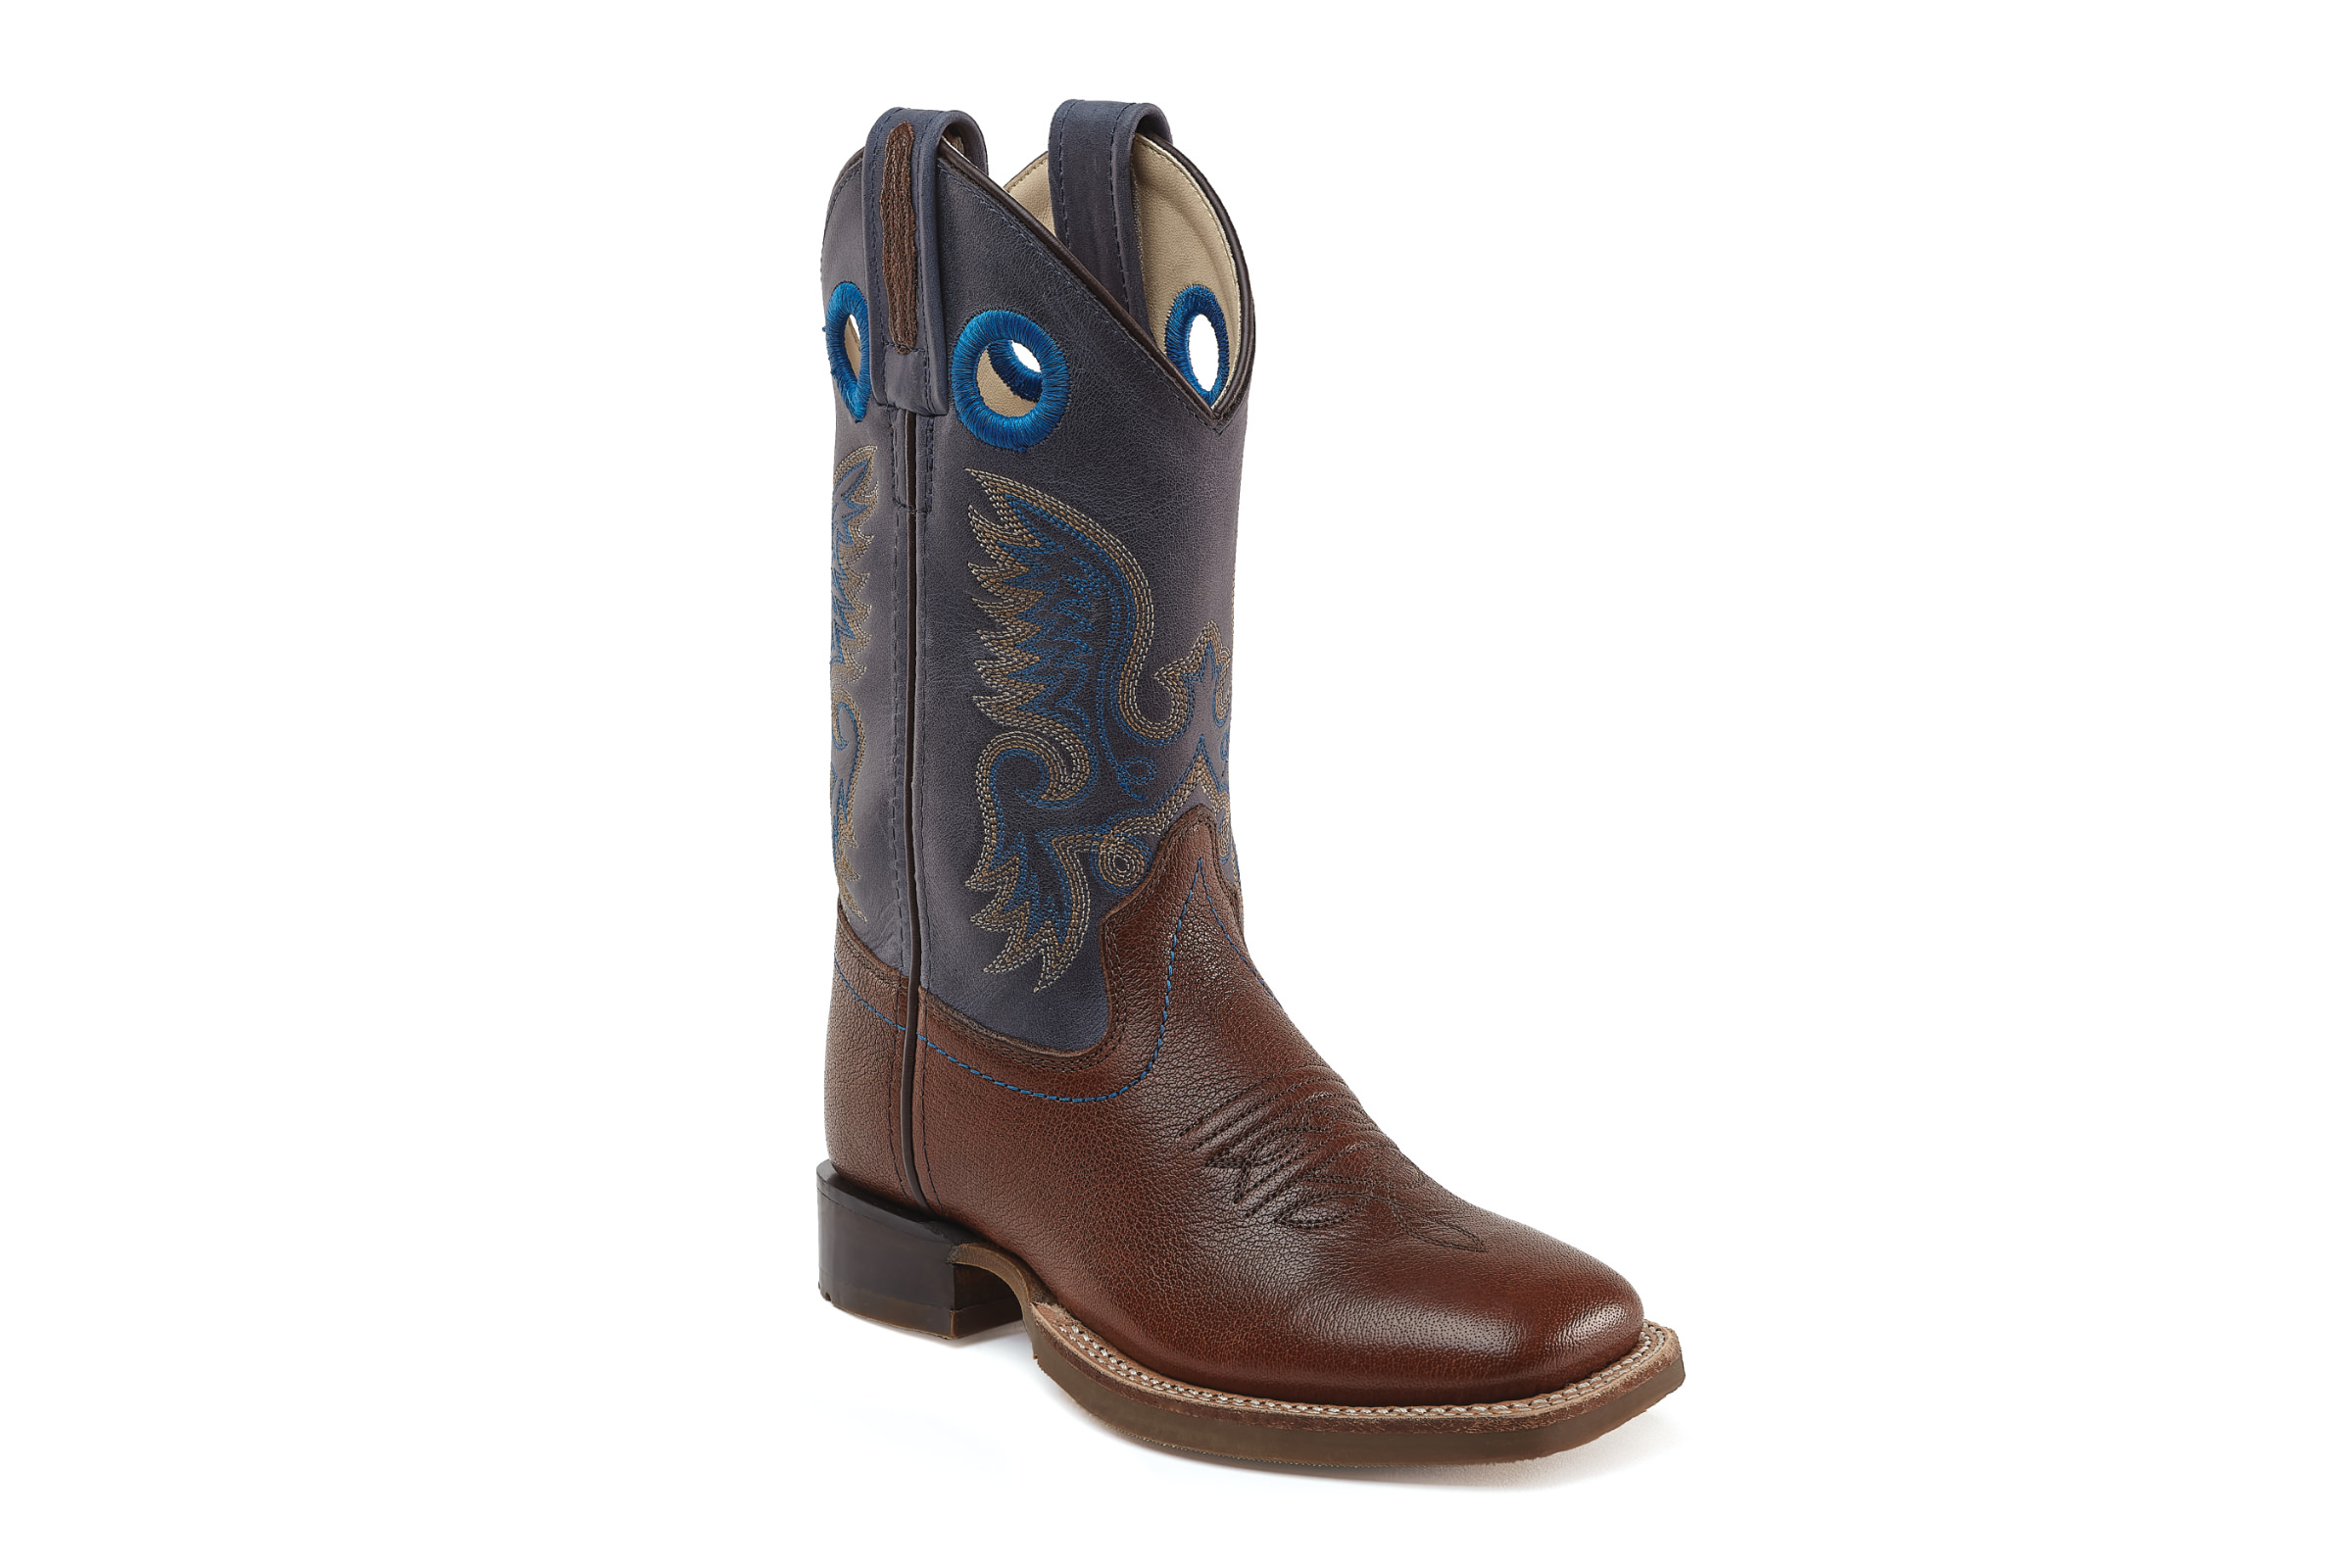 Western boots for children "San Angelo", brown/blue